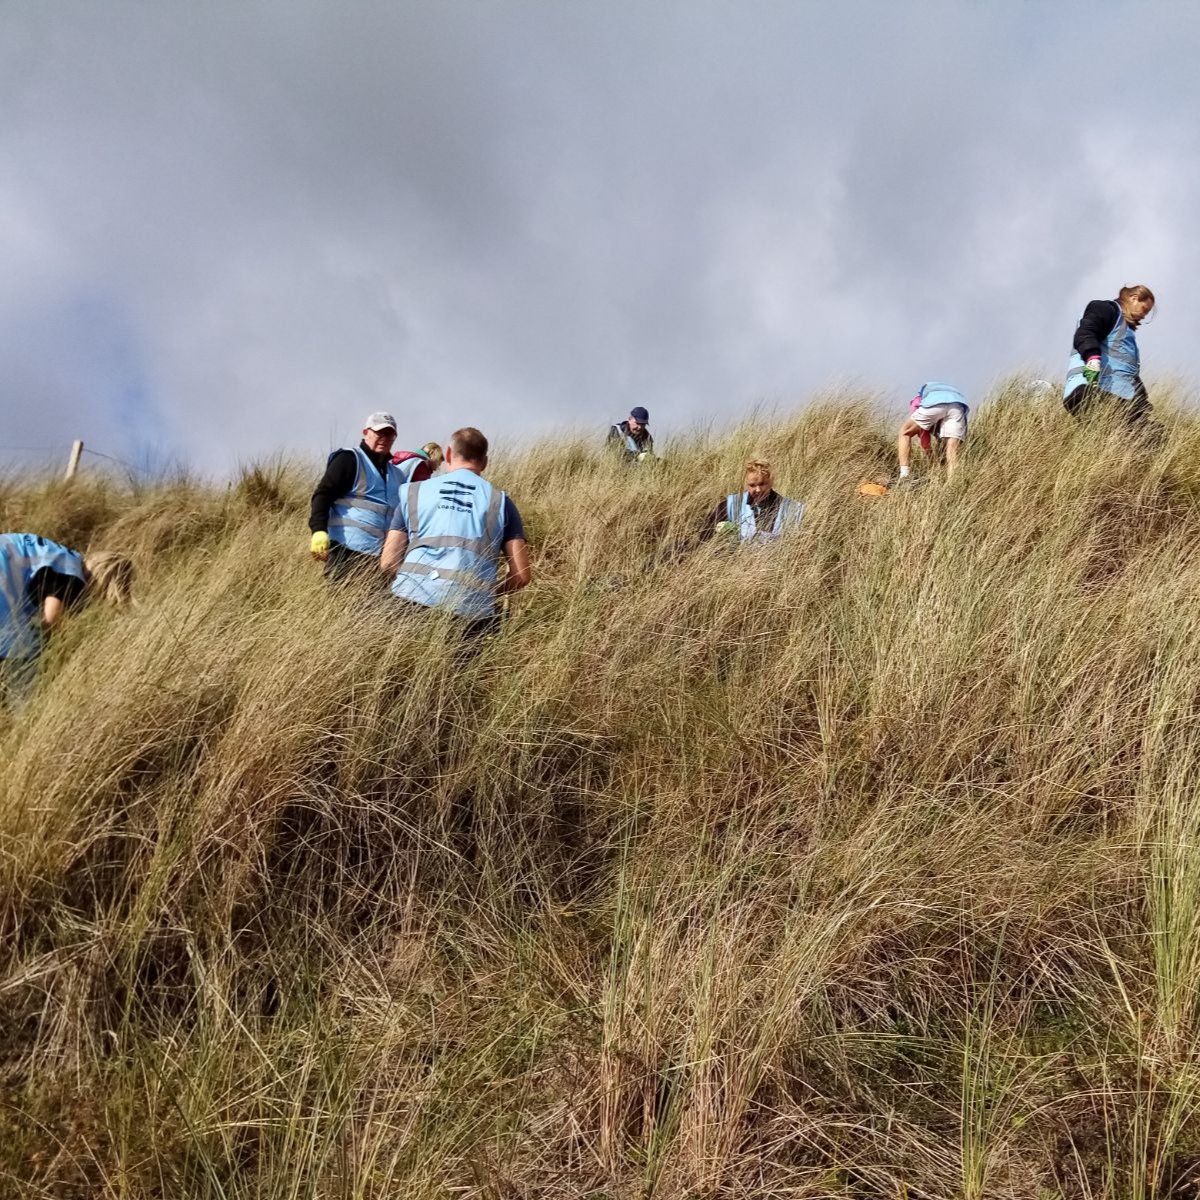 A wonderful day's work from the Wealth Management from St James' Place! They worked with volunteers Chris, Jo and Rob to help tackle Pirri Pirri burr in the dunes and pick up litter from the beach. #conservation #aonb #northumberlandcoast #volunteer #marinelife